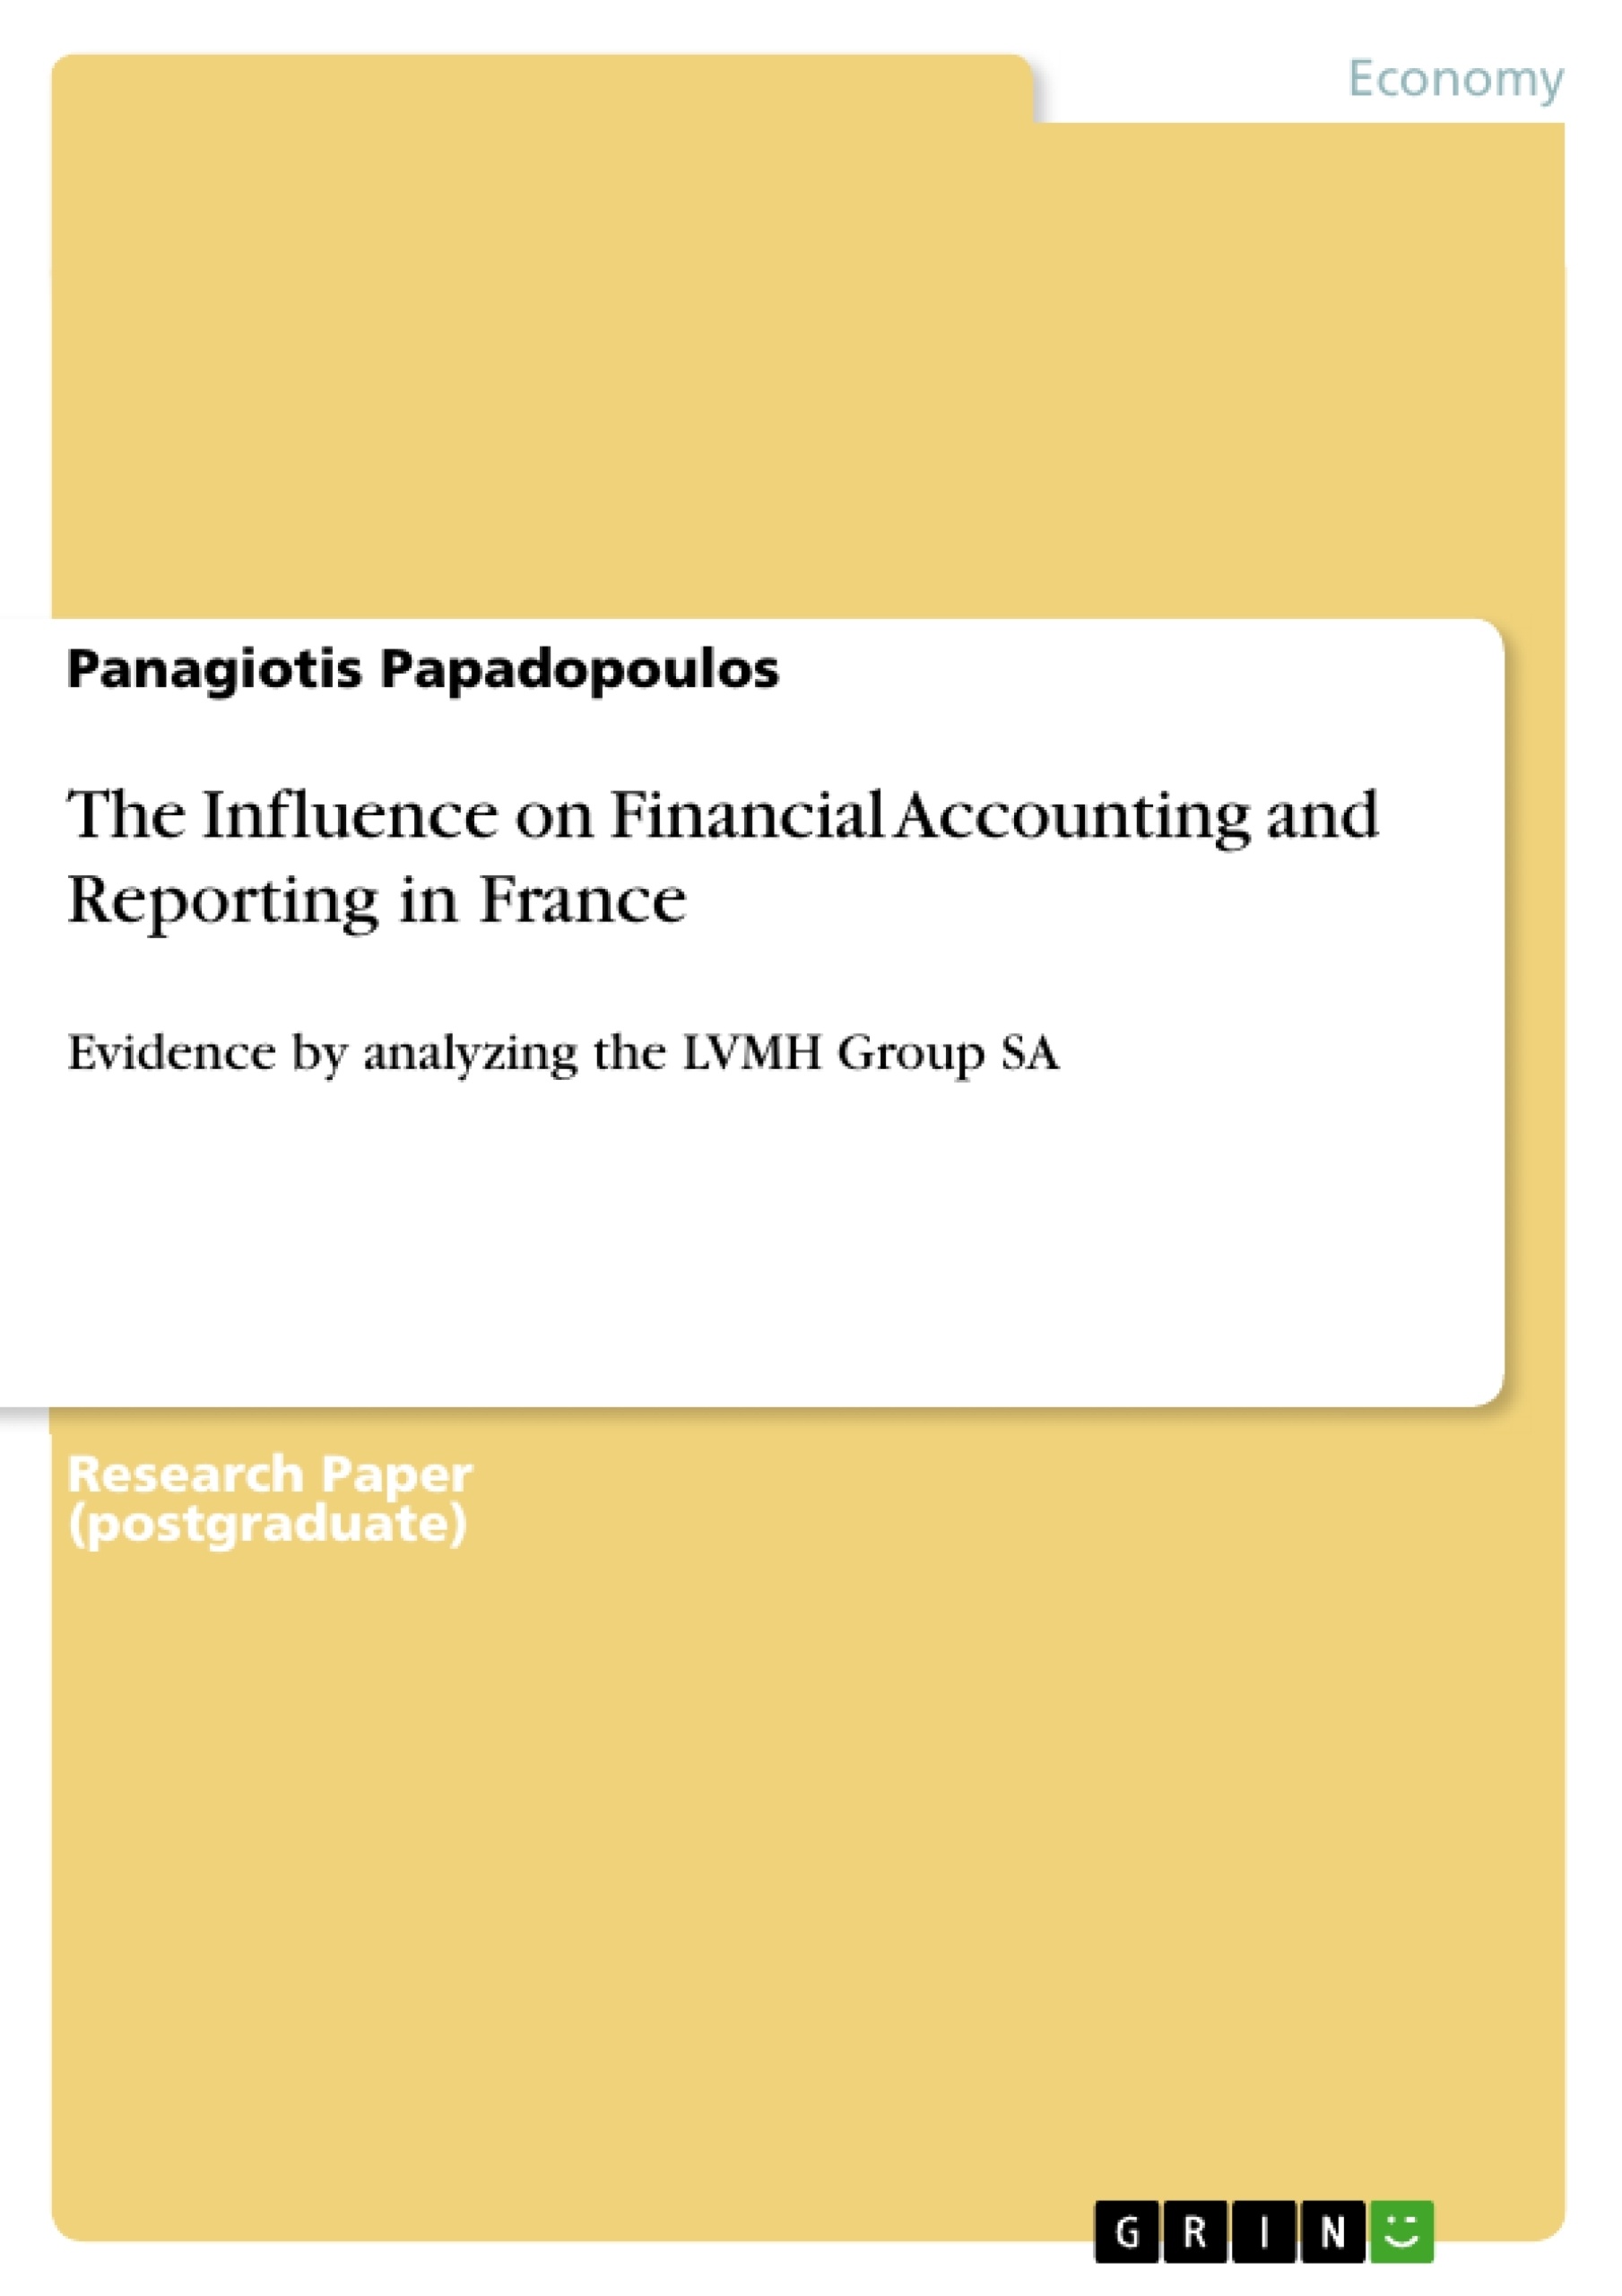 Title: The Influence on Financial Accounting and Reporting in France